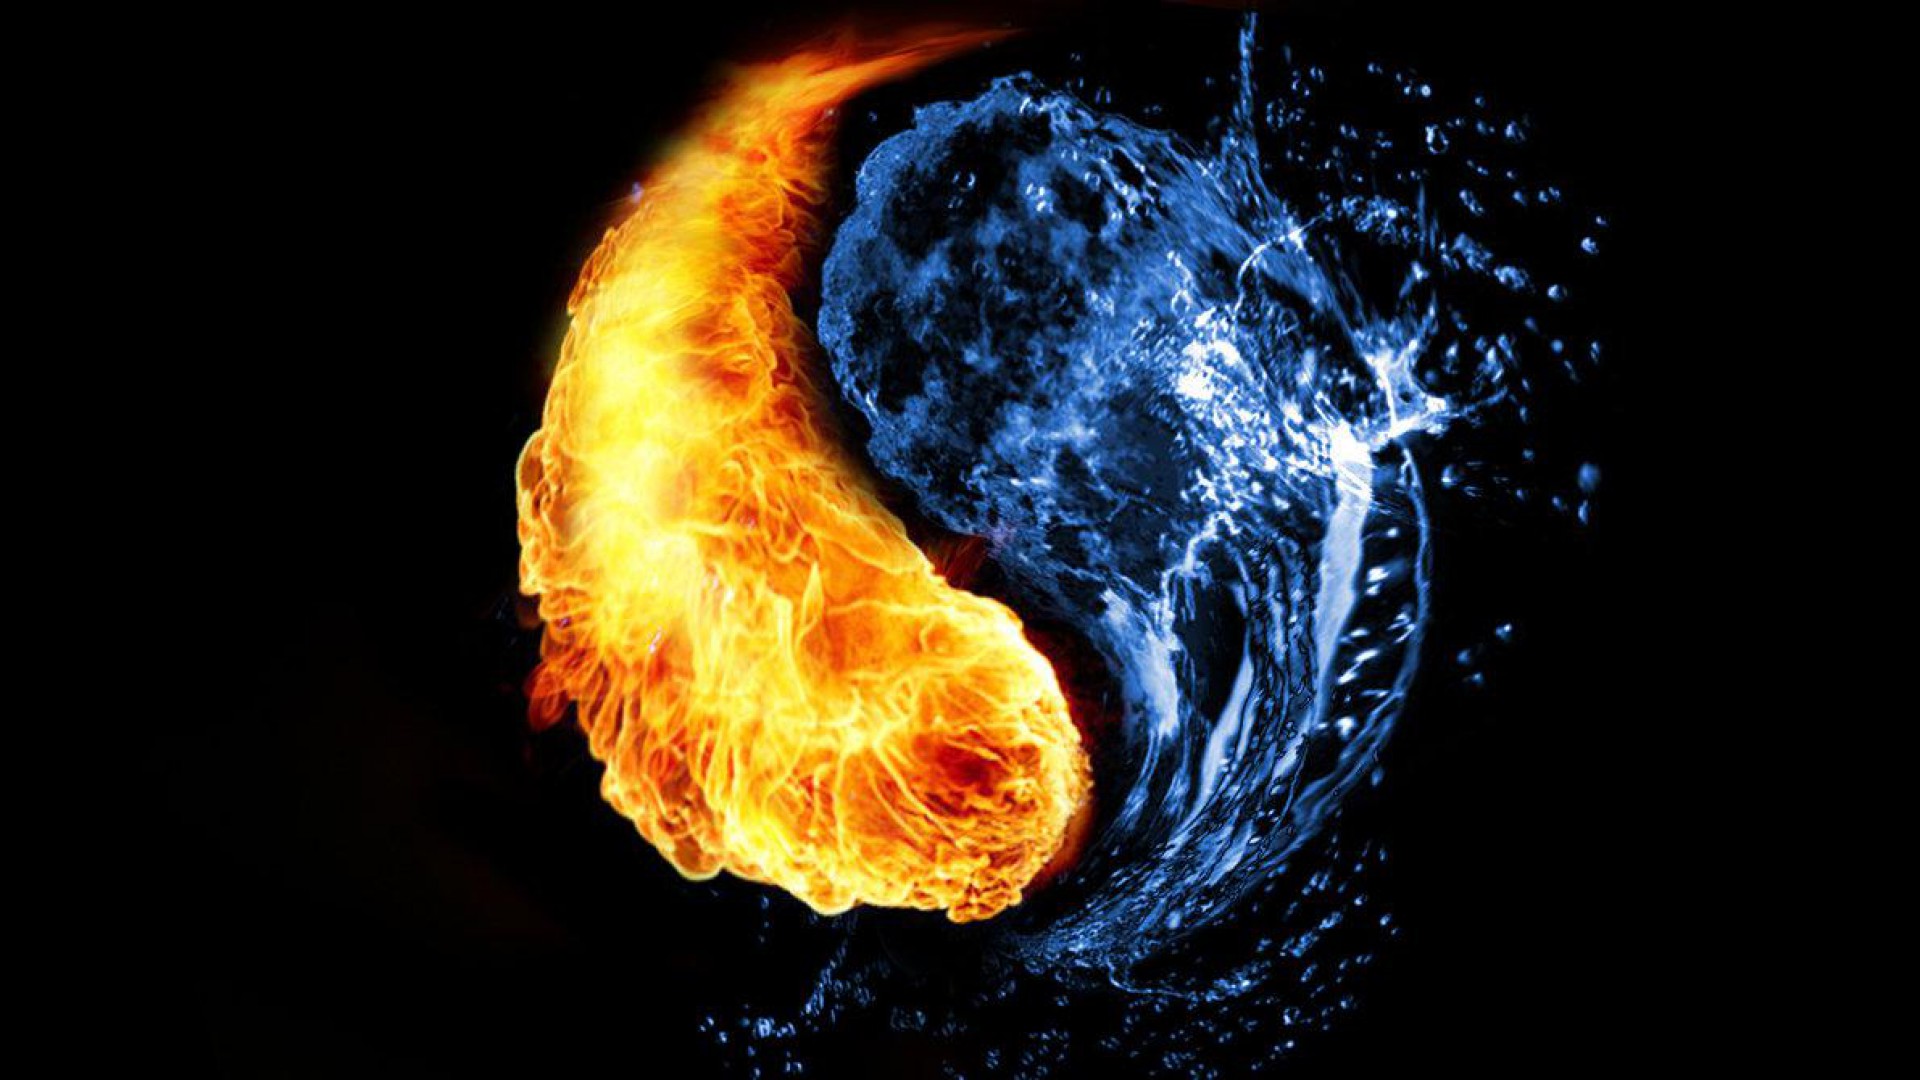 Of Cool Blue Fire Skull Background HD Wallpaper Background